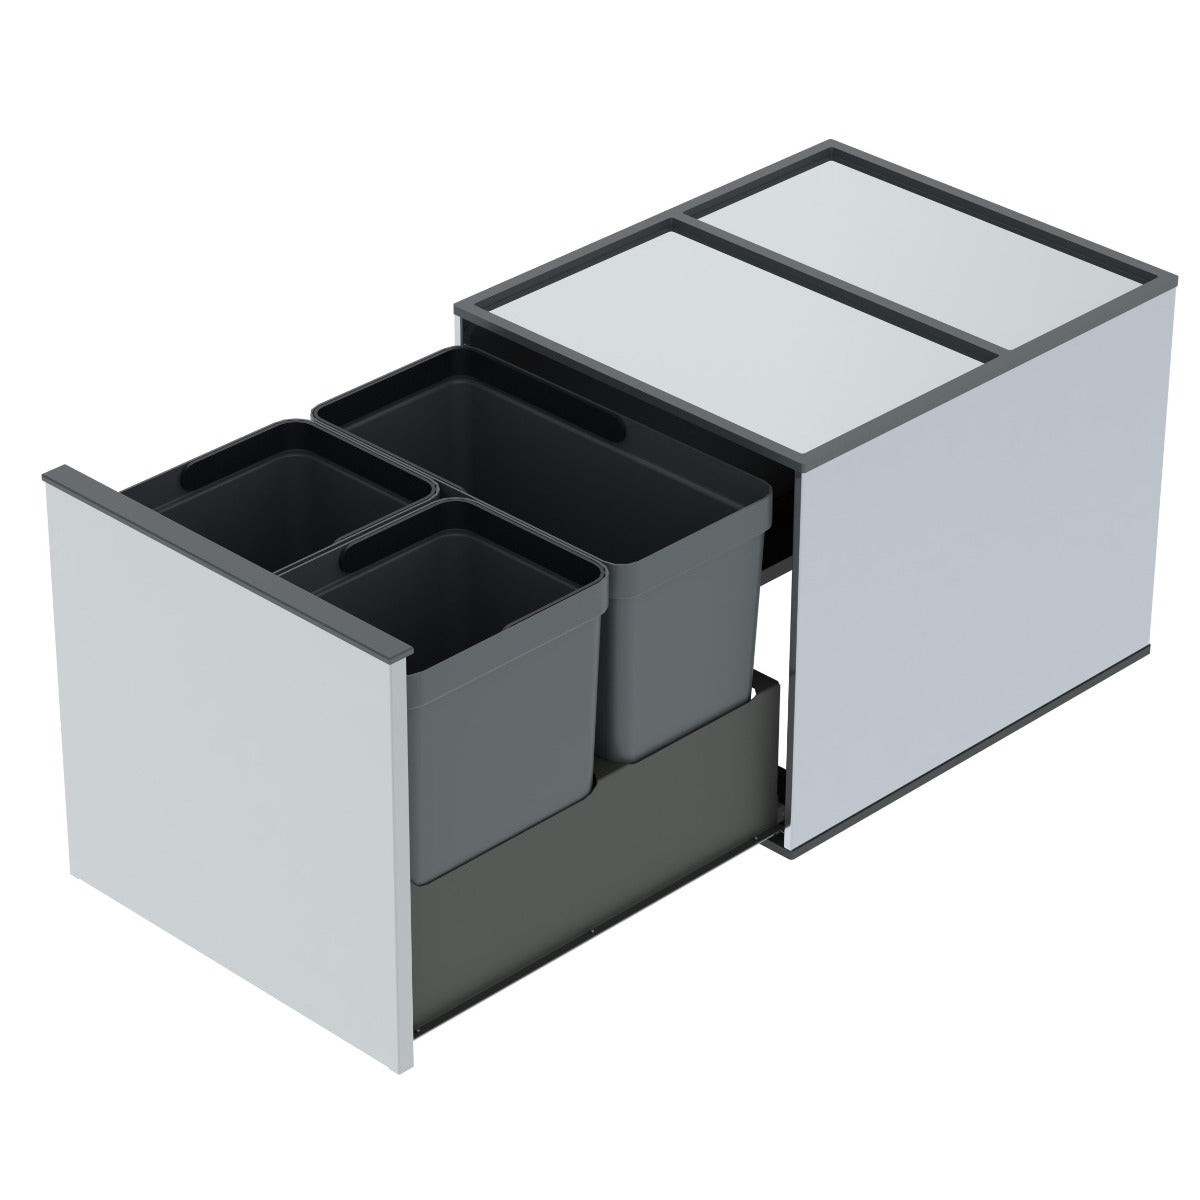 Tecnoinox Highline 3 compartment 36 Litre in-cupboard kitchen bin for 450mm wide hinged door cabinet with integrated soft-close Highline3.3